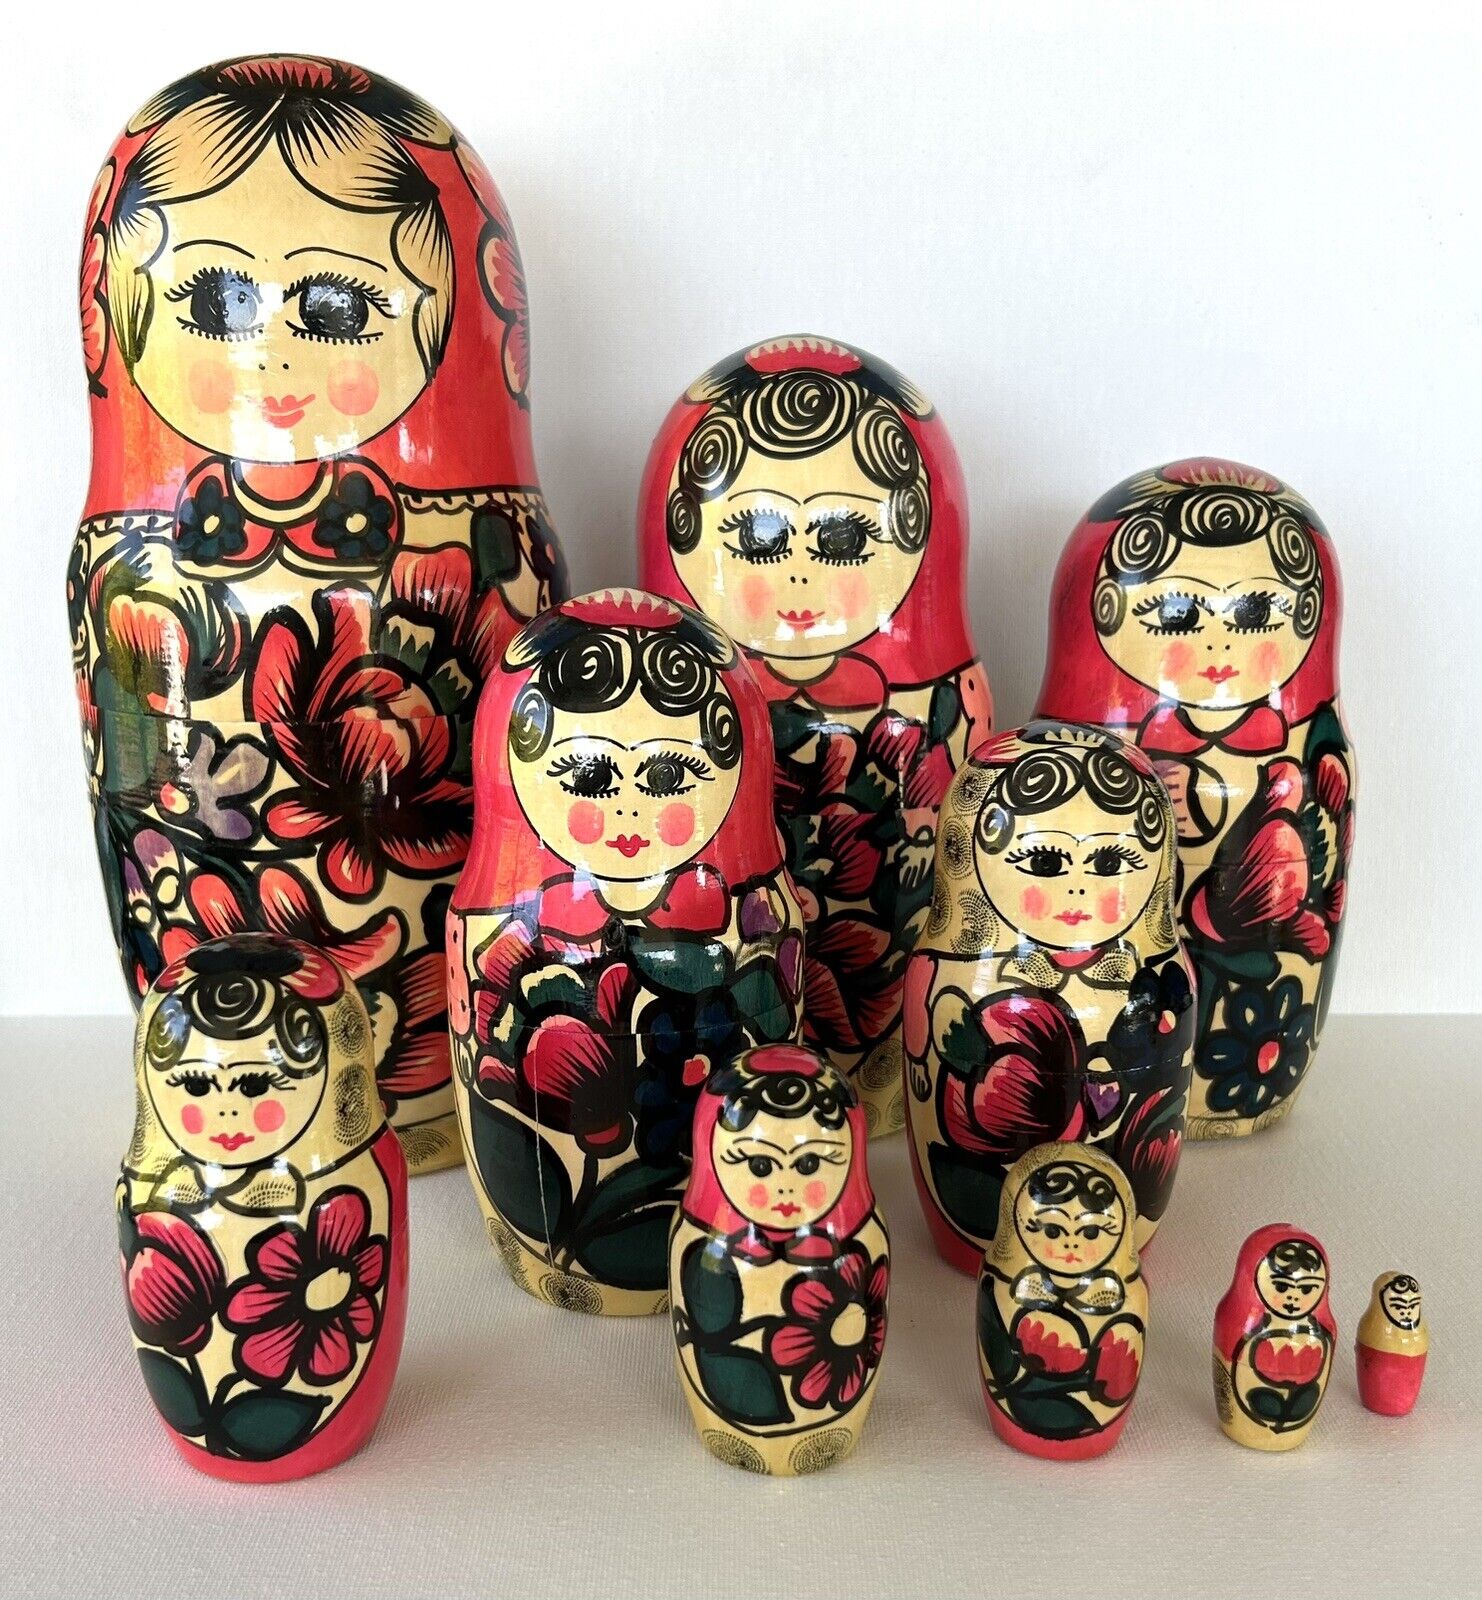 LARGE VTG Russian Matryoshka Nesting Stacking Dolls 10 Pieces Hand Painted 11”H